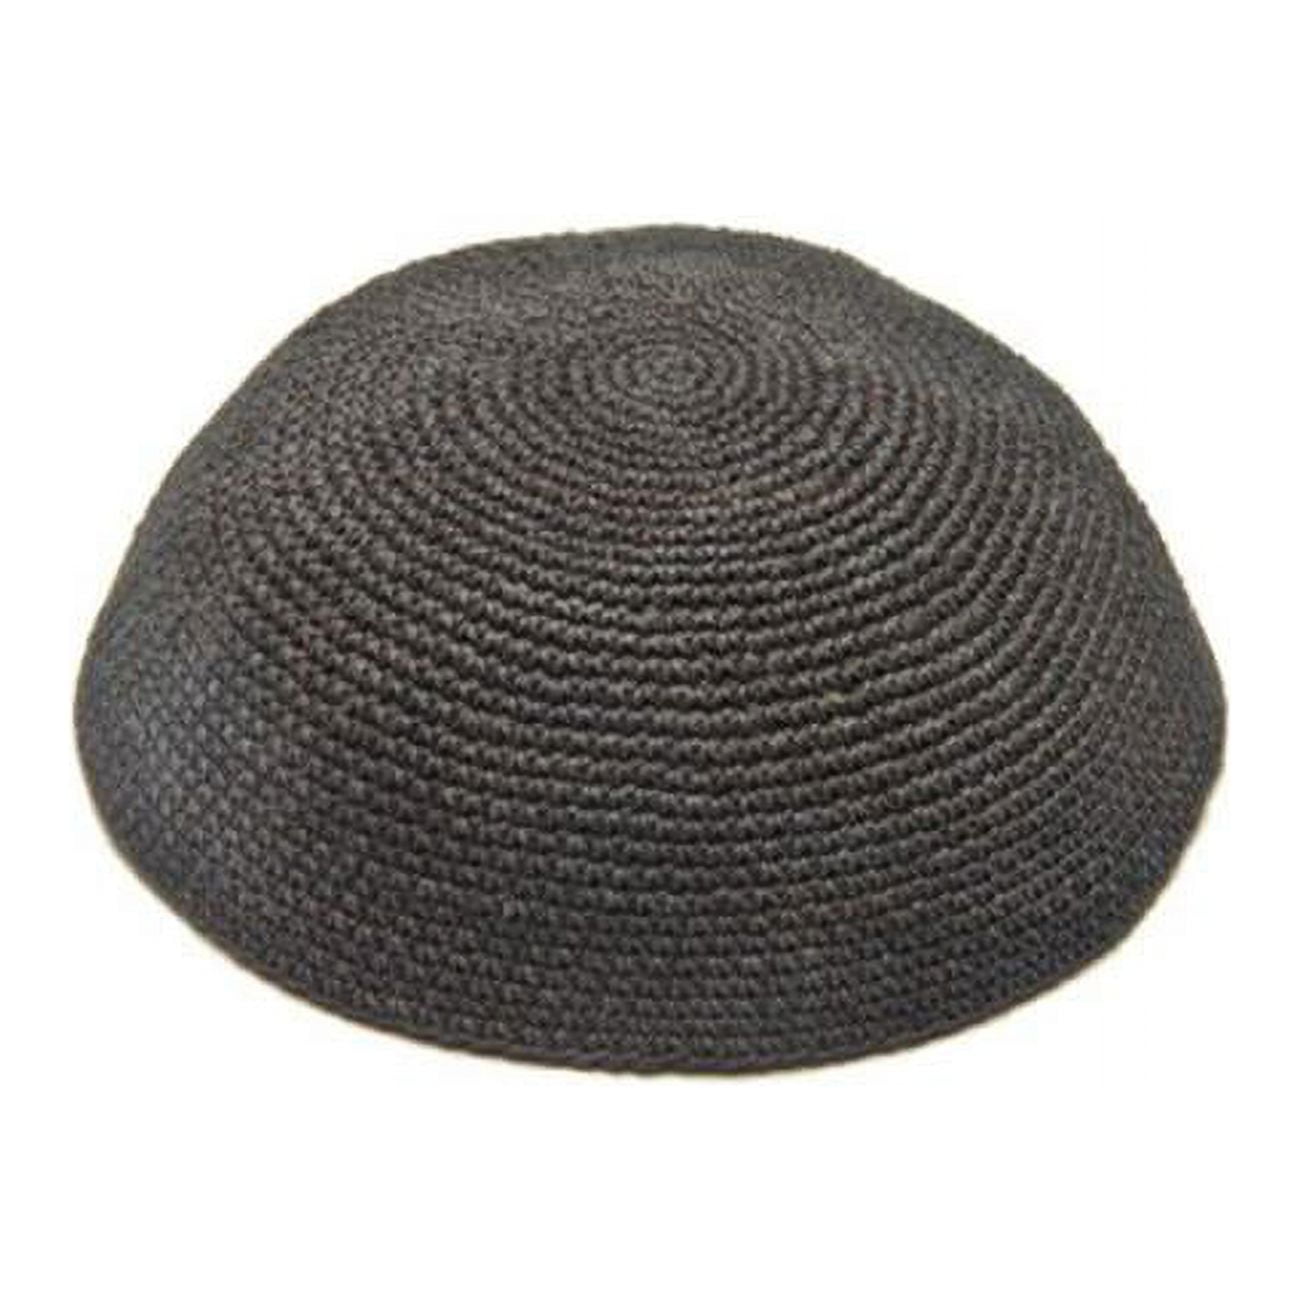 Picture of Art Judaica 16211 16 cm Thick Black Kippah with Holes